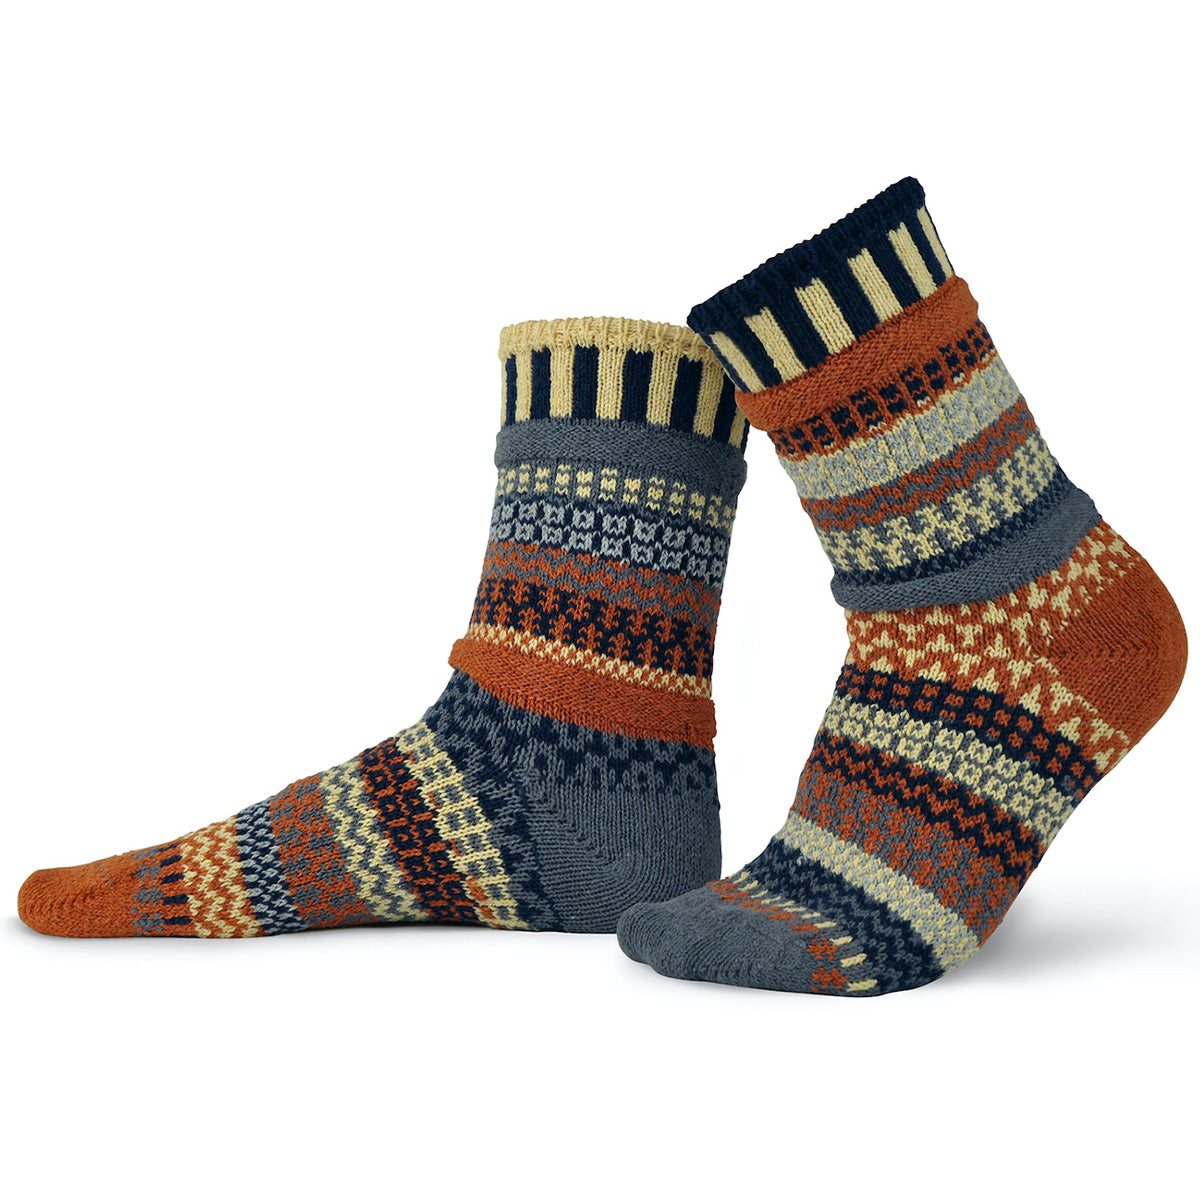 Cozy woven socks from Solmates feature wild mismatched patterns.